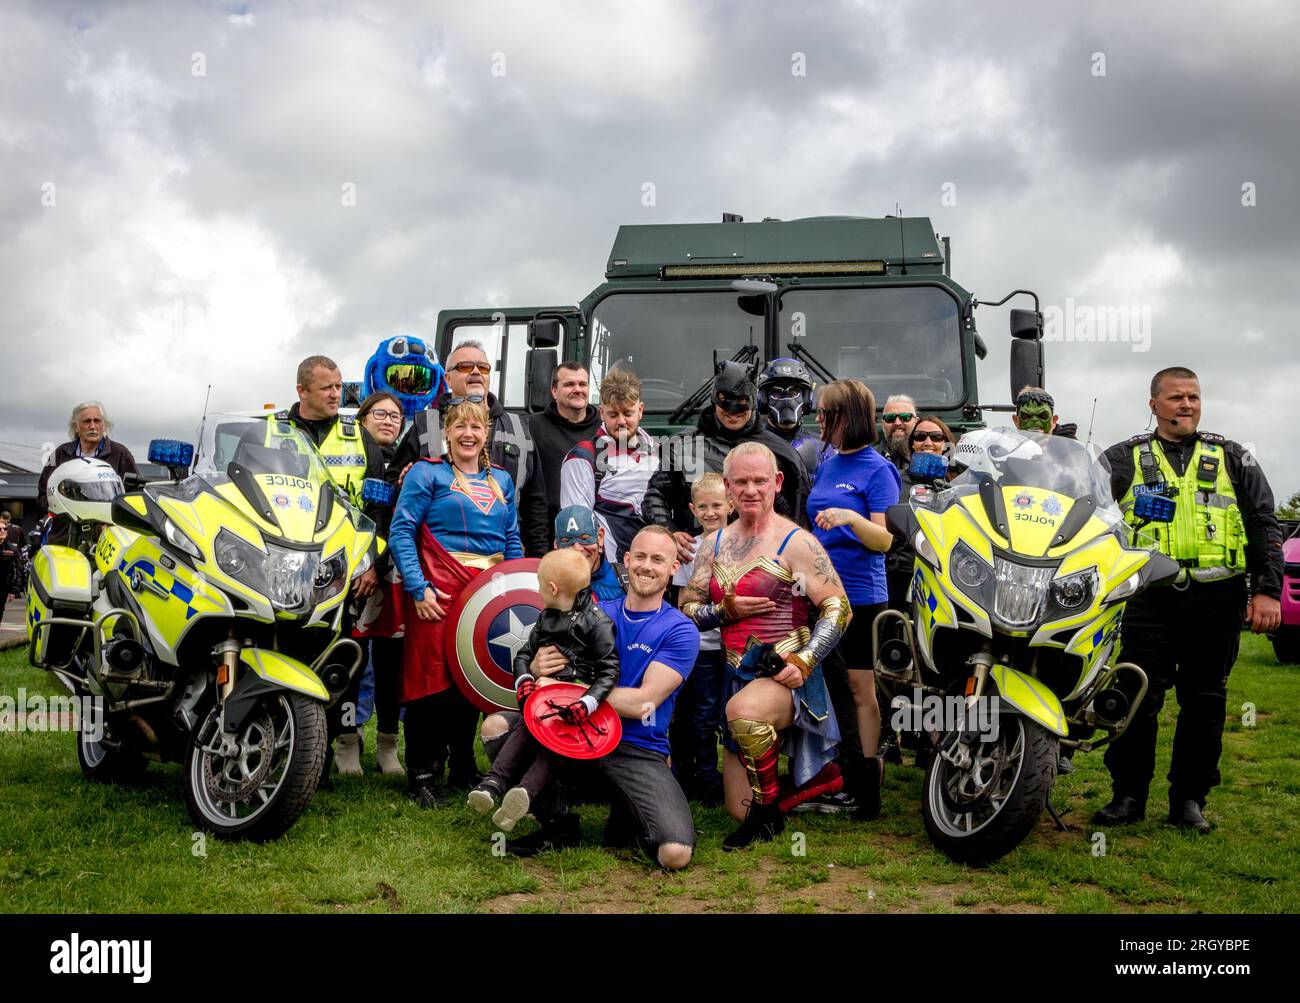 Eastbourne, East Sussex, UK. 12th Aug, 2023. Hundreds of Motorcyclists, motorcycle groups and vintage vehicles from around the region gather to take part in a fundraiser for 6 year Alfie from Eastbourne who has been battling a brain tumour since 2017. The riders who will escort Alfie around the parts of East Sussex to raise funds to assist with Alfie's treatment for the tumour which is now impacting on his eyesight. Any funds raised will also go towards financing a trip to Disneyland for Alfie and his family. Credit: Newspics UK South/Alamy Live News Stock Photo